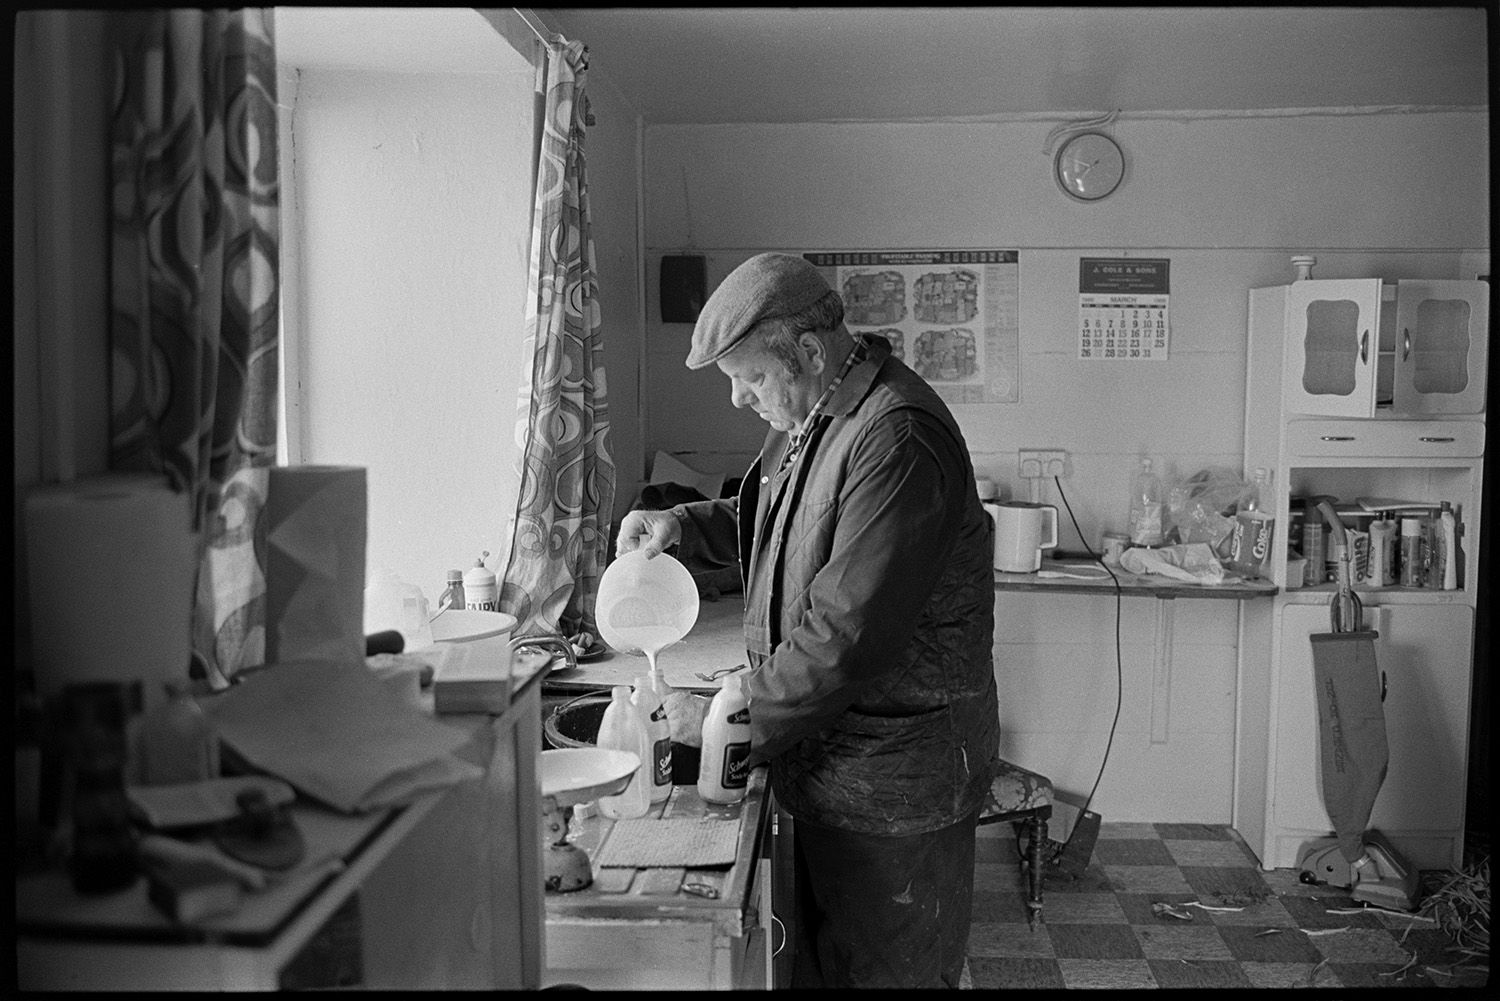 Shepherd feeding lambs beside cob and thatch farmhouse, mixing feed in kitchen.
[John Moyes in the kitchen of Brookland Farm, Chulmleigh filling bottles with milk to feed lambs. Various items can be seen in the kitchen including a hoover, kettle and calendar hung on the wall.]